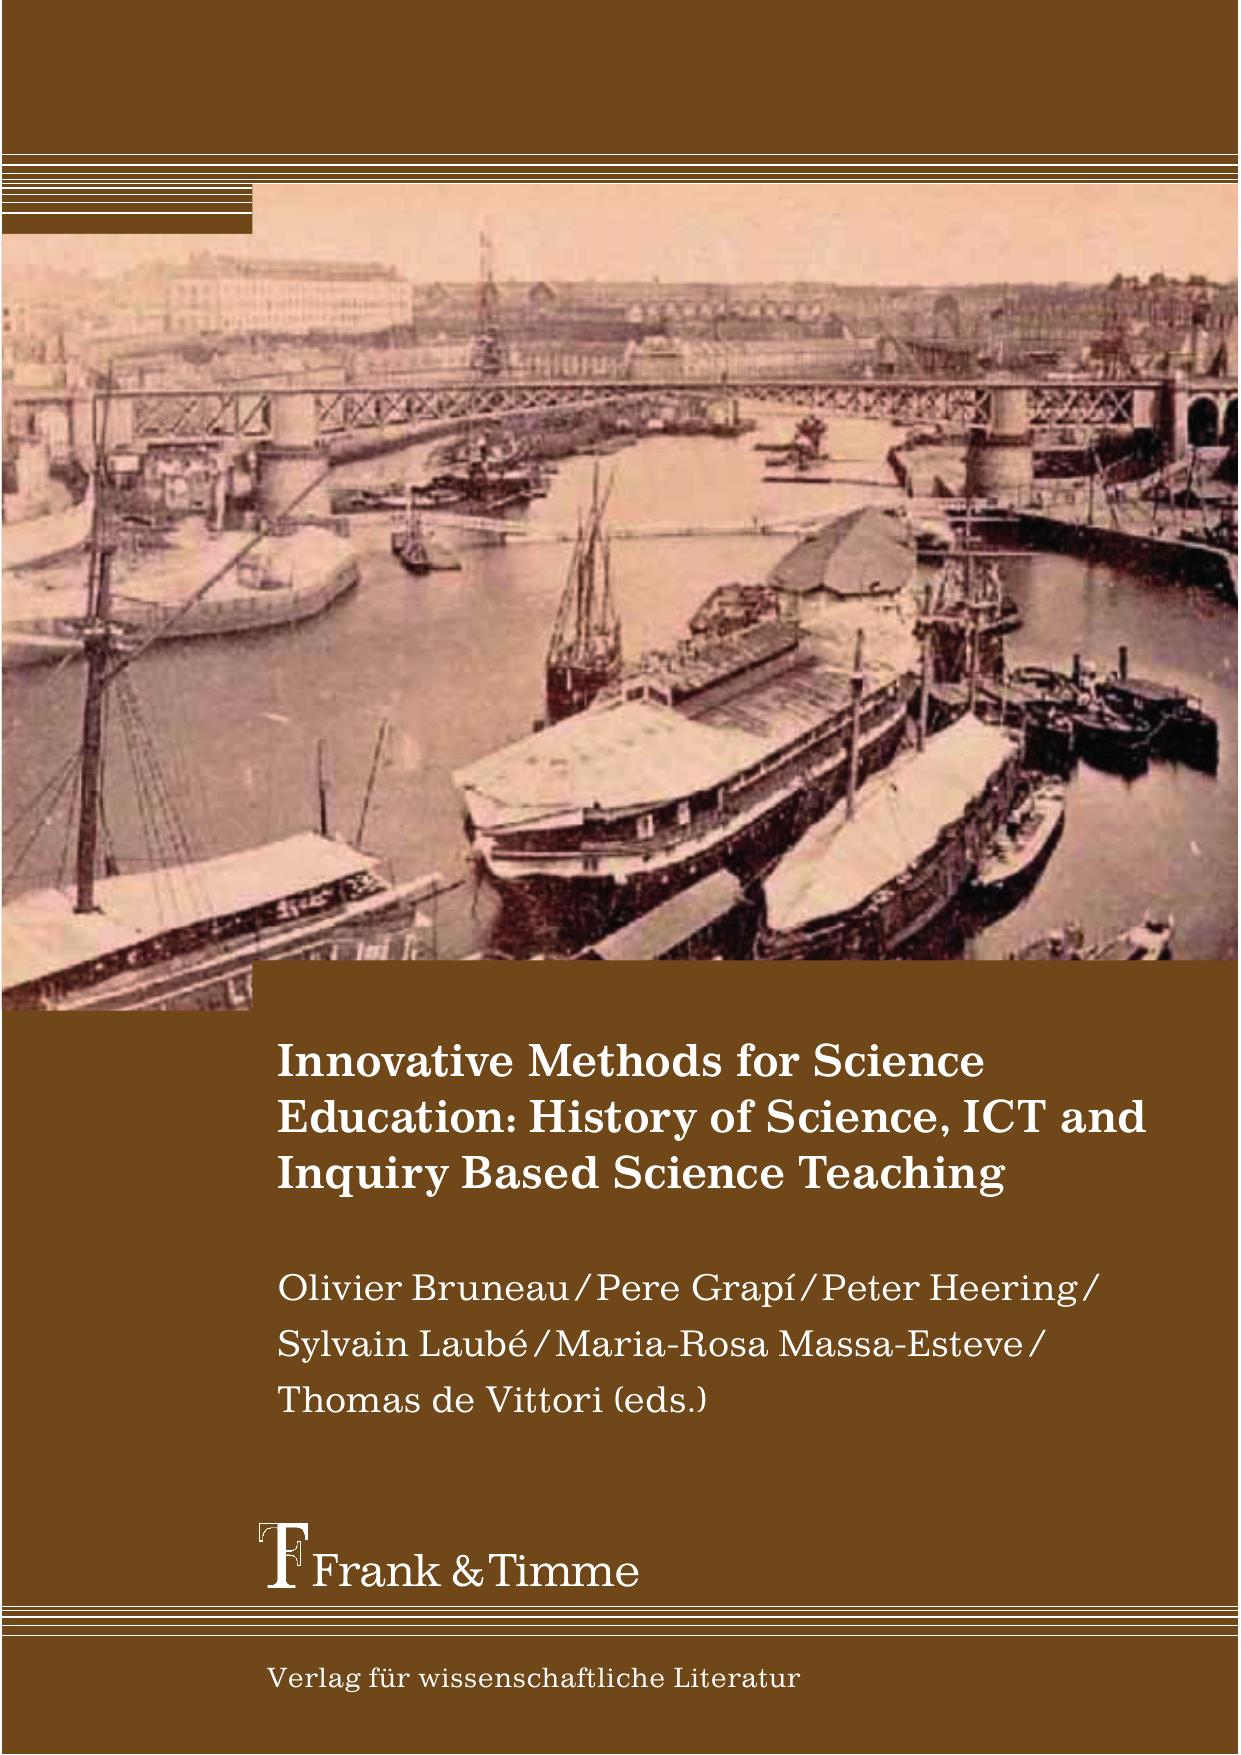 Innovative Methods for Science Education: History of Science, ICT and Inquiry Based Science Teaching : History of Science, ICT and Inquiry Based Science Teaching by unknow